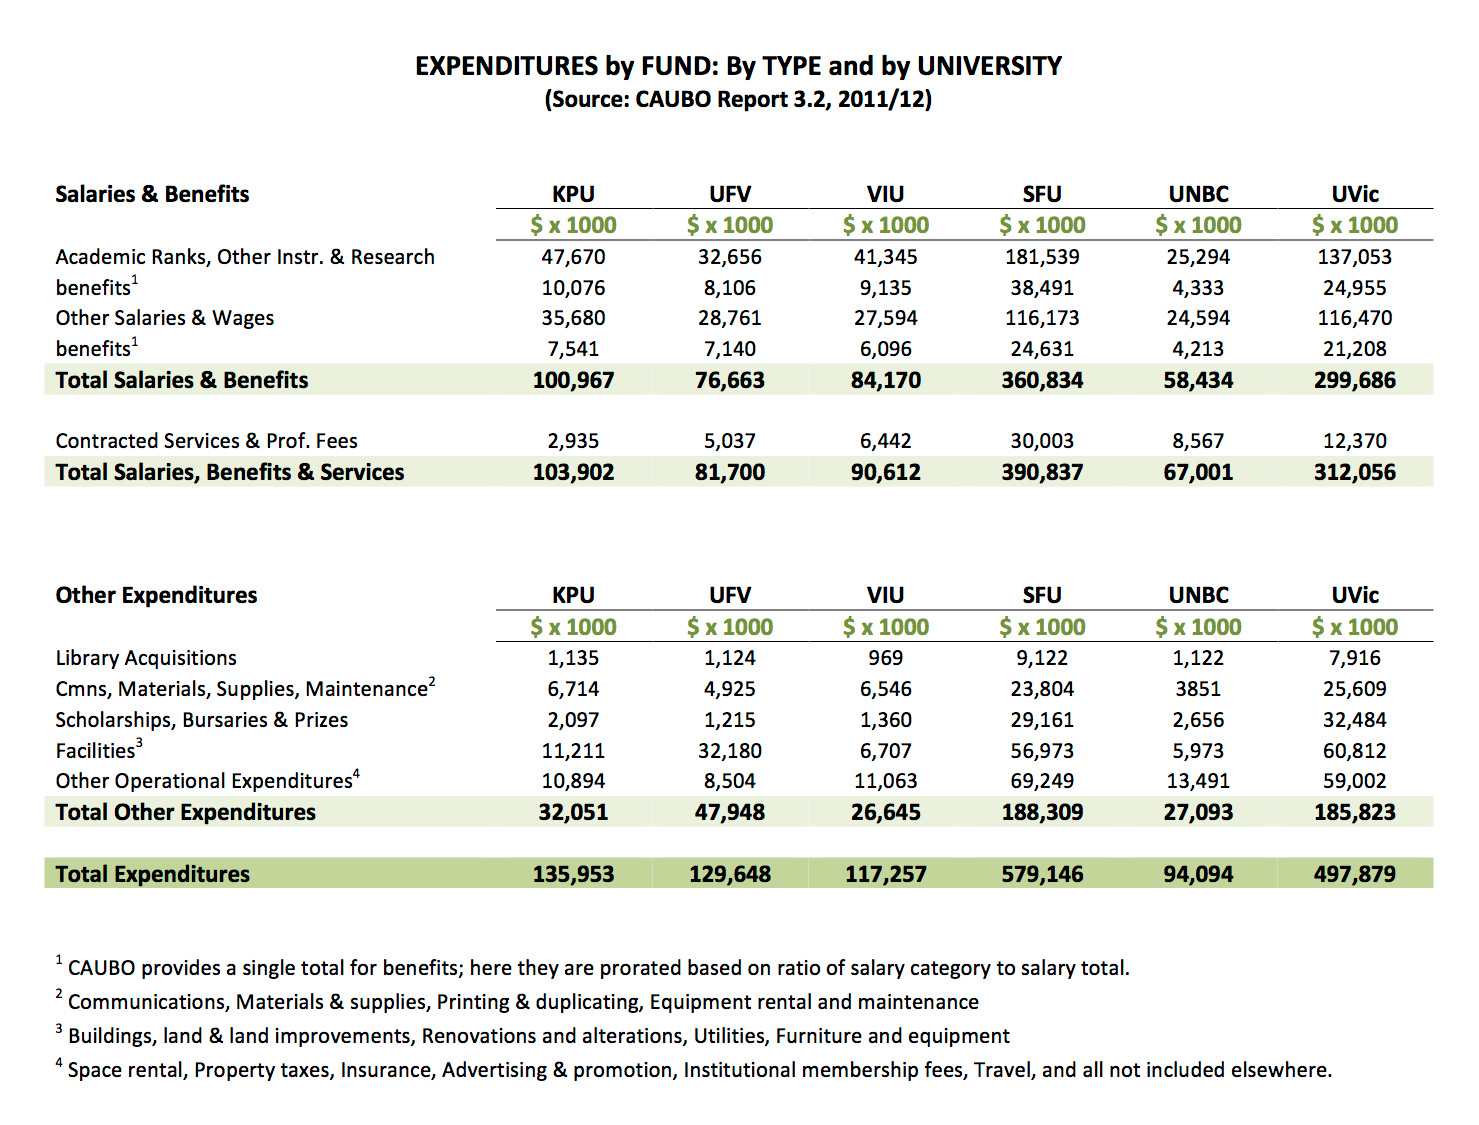 Expenditures by Fund by Type